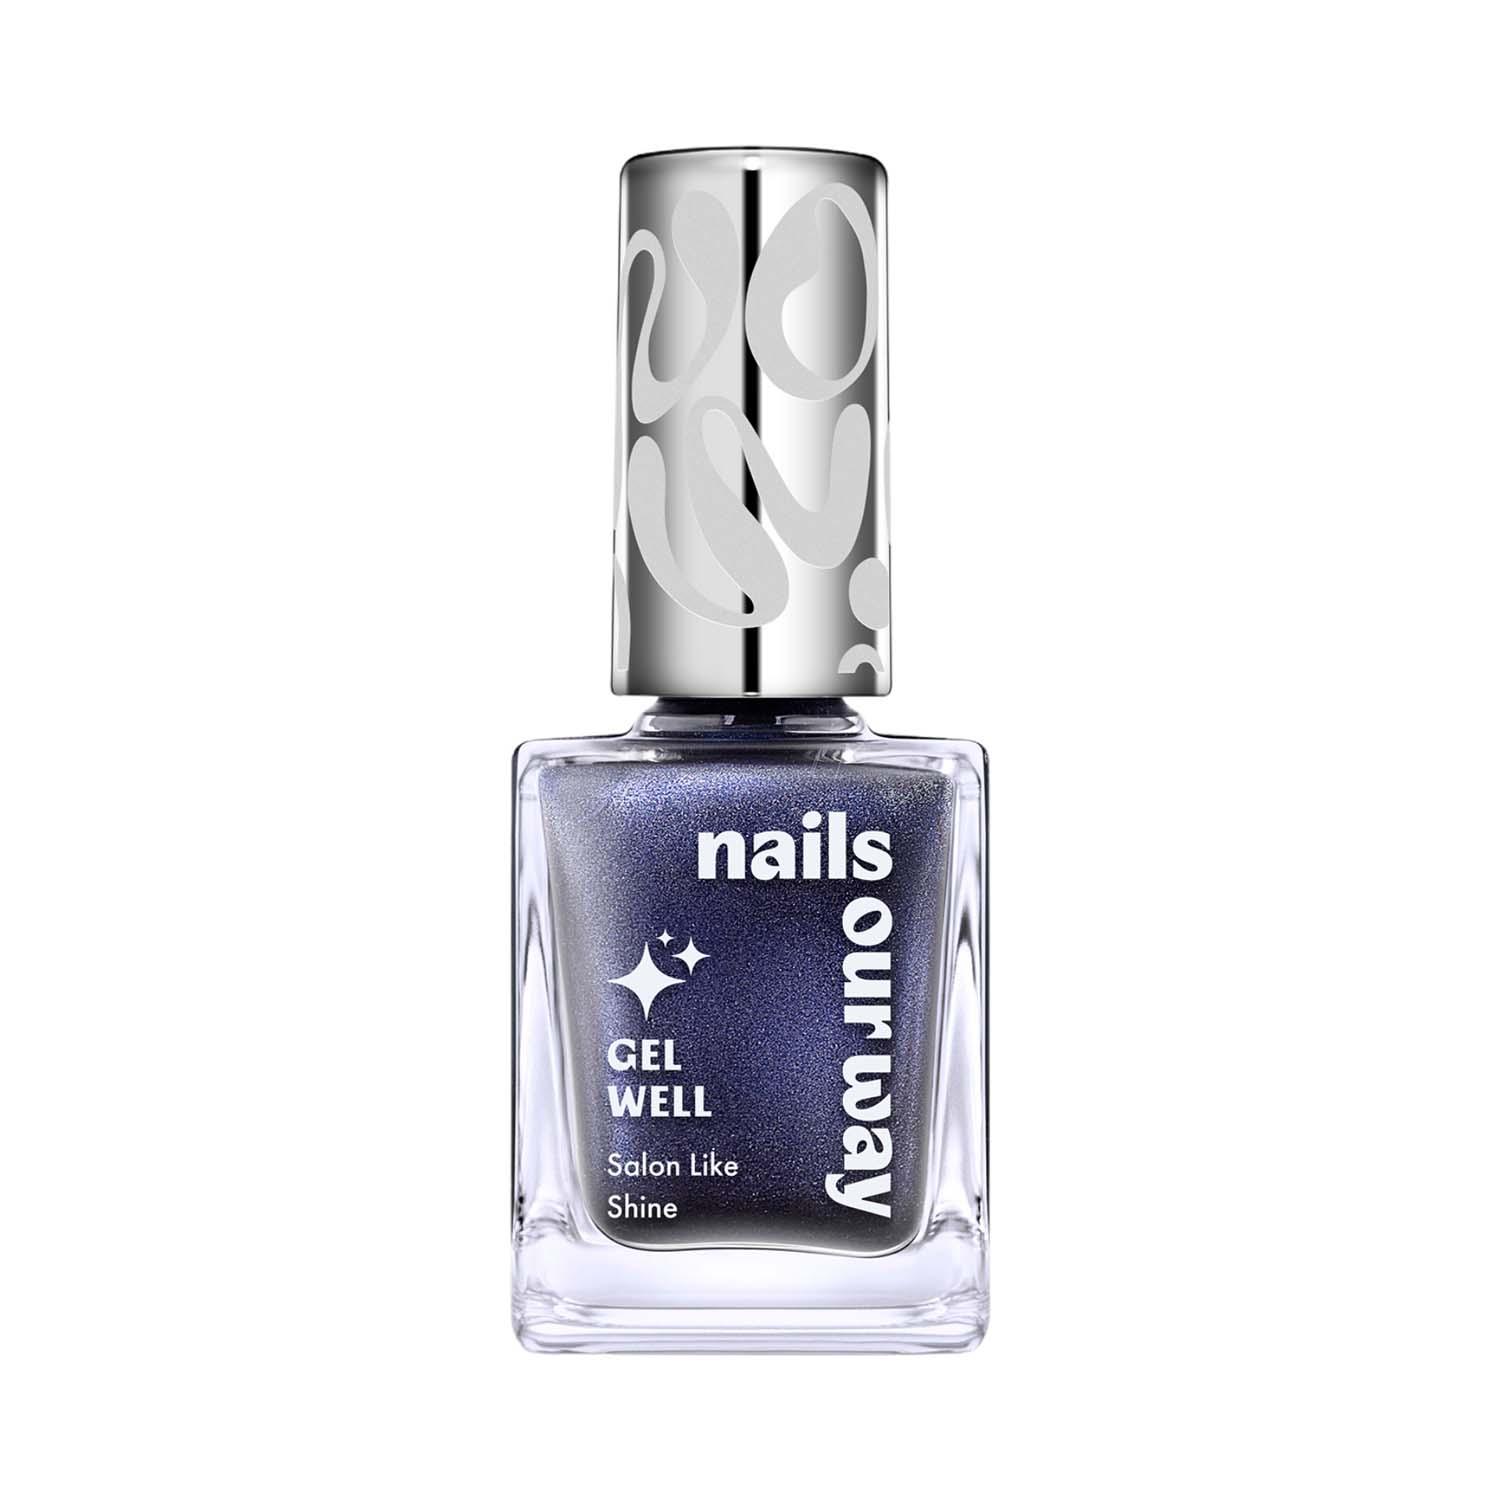 Nails Our Way | Nails Our Way Gel Well Nail Enamel - 216 Rebel (10 ml)